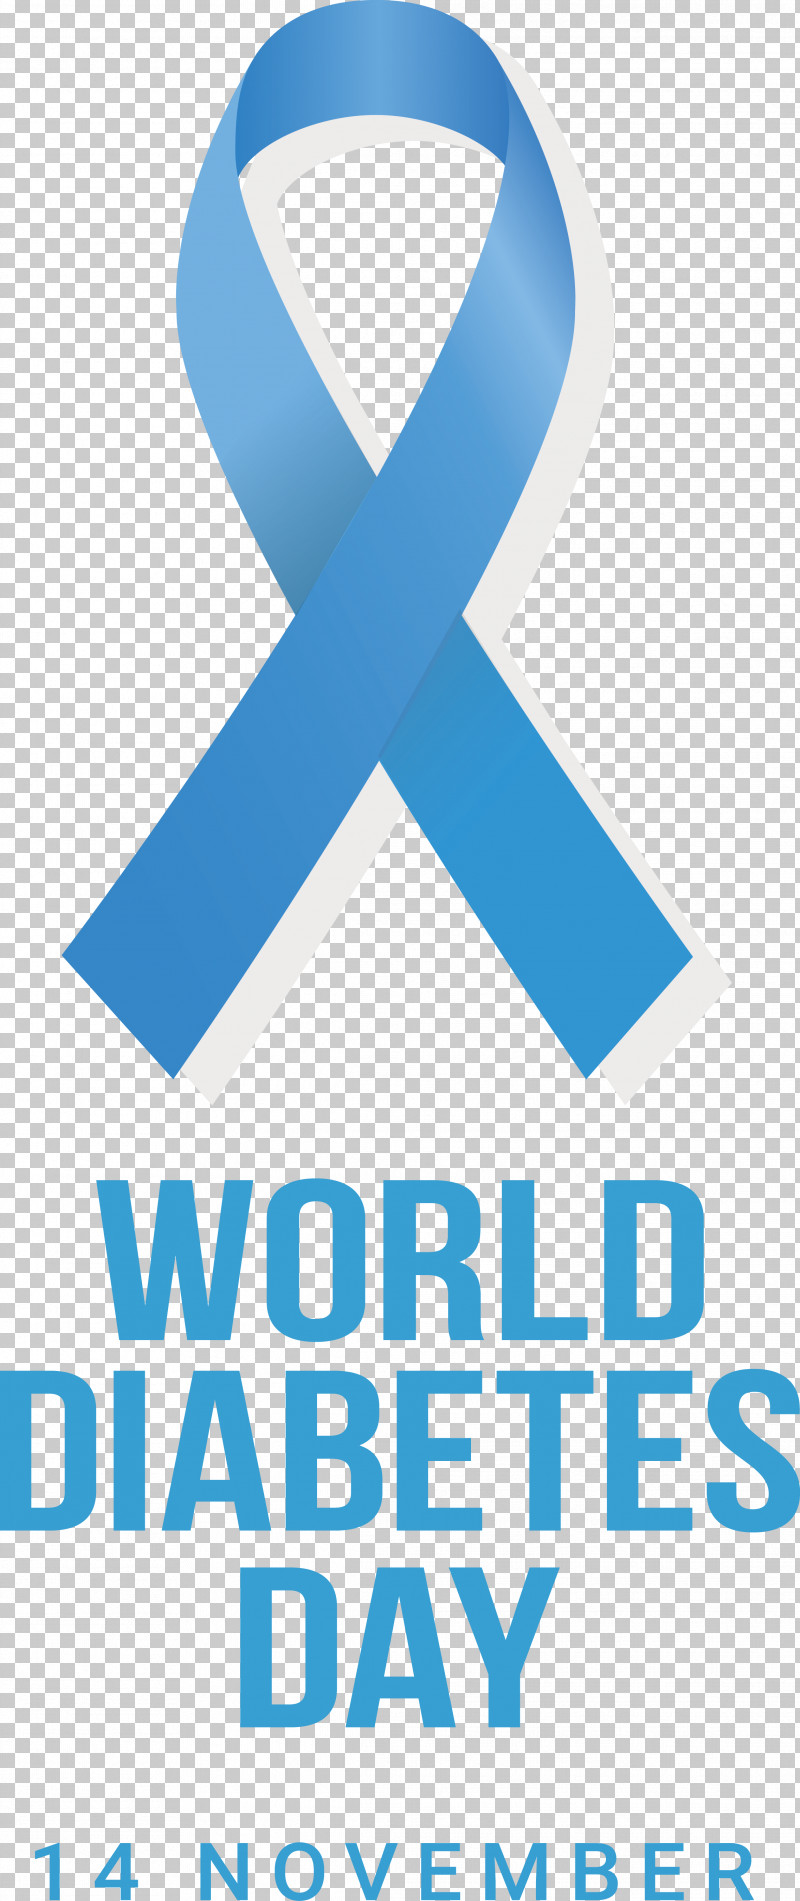 World Diabetes Day PNG, Clipart, Diabetes, Health, World Diabetes Day Free PNG Download